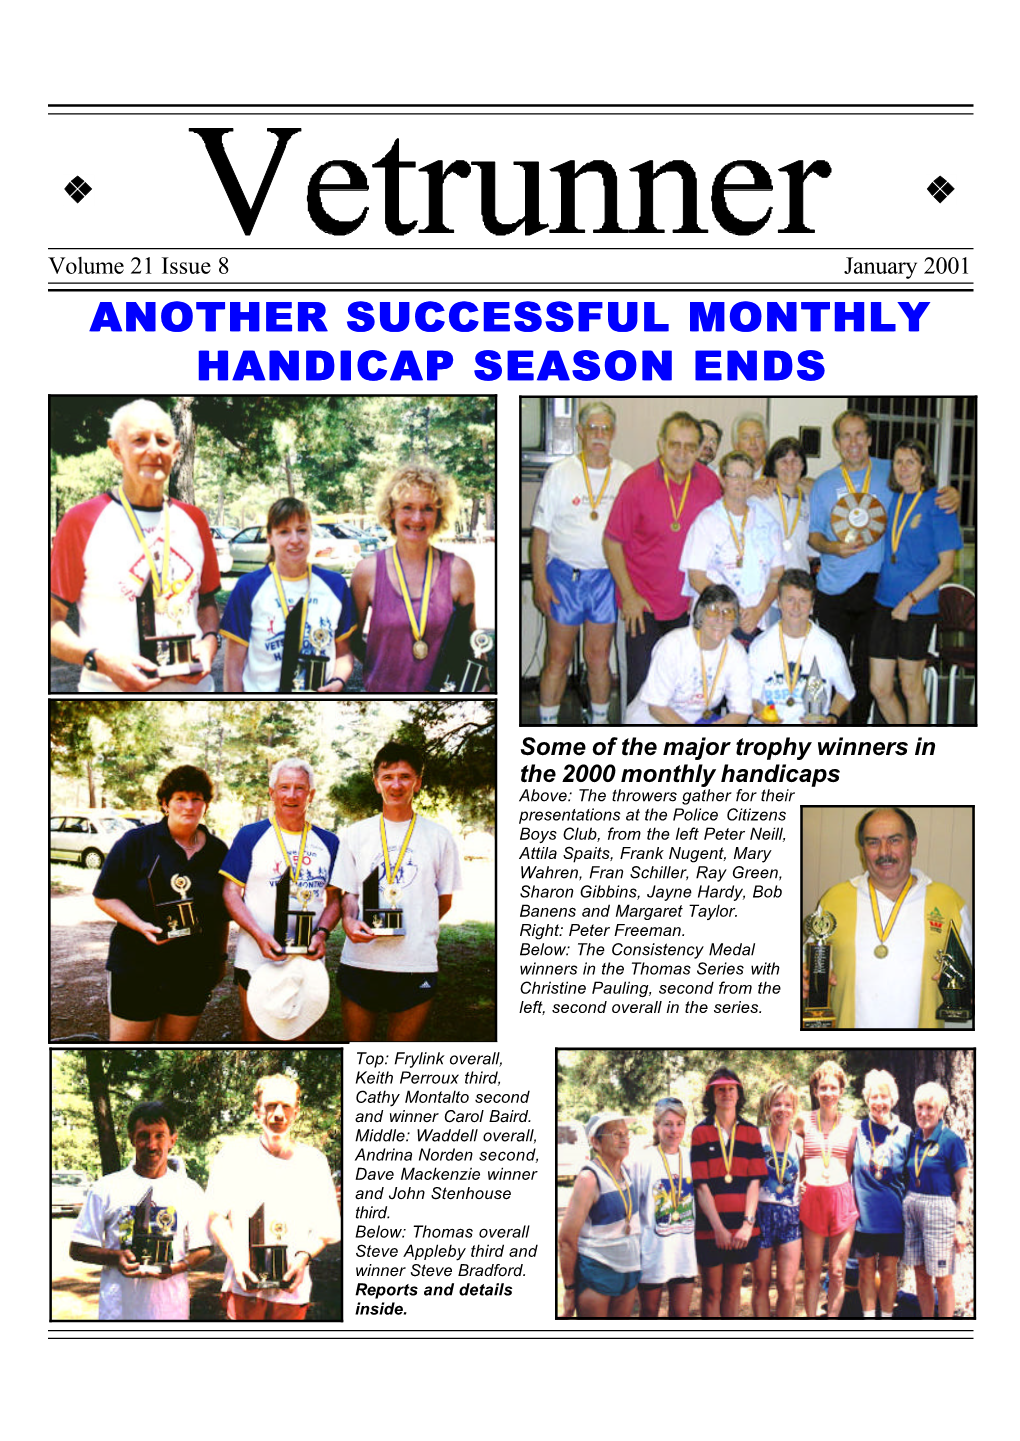 Another Successful Monthly Handicap Season Ends